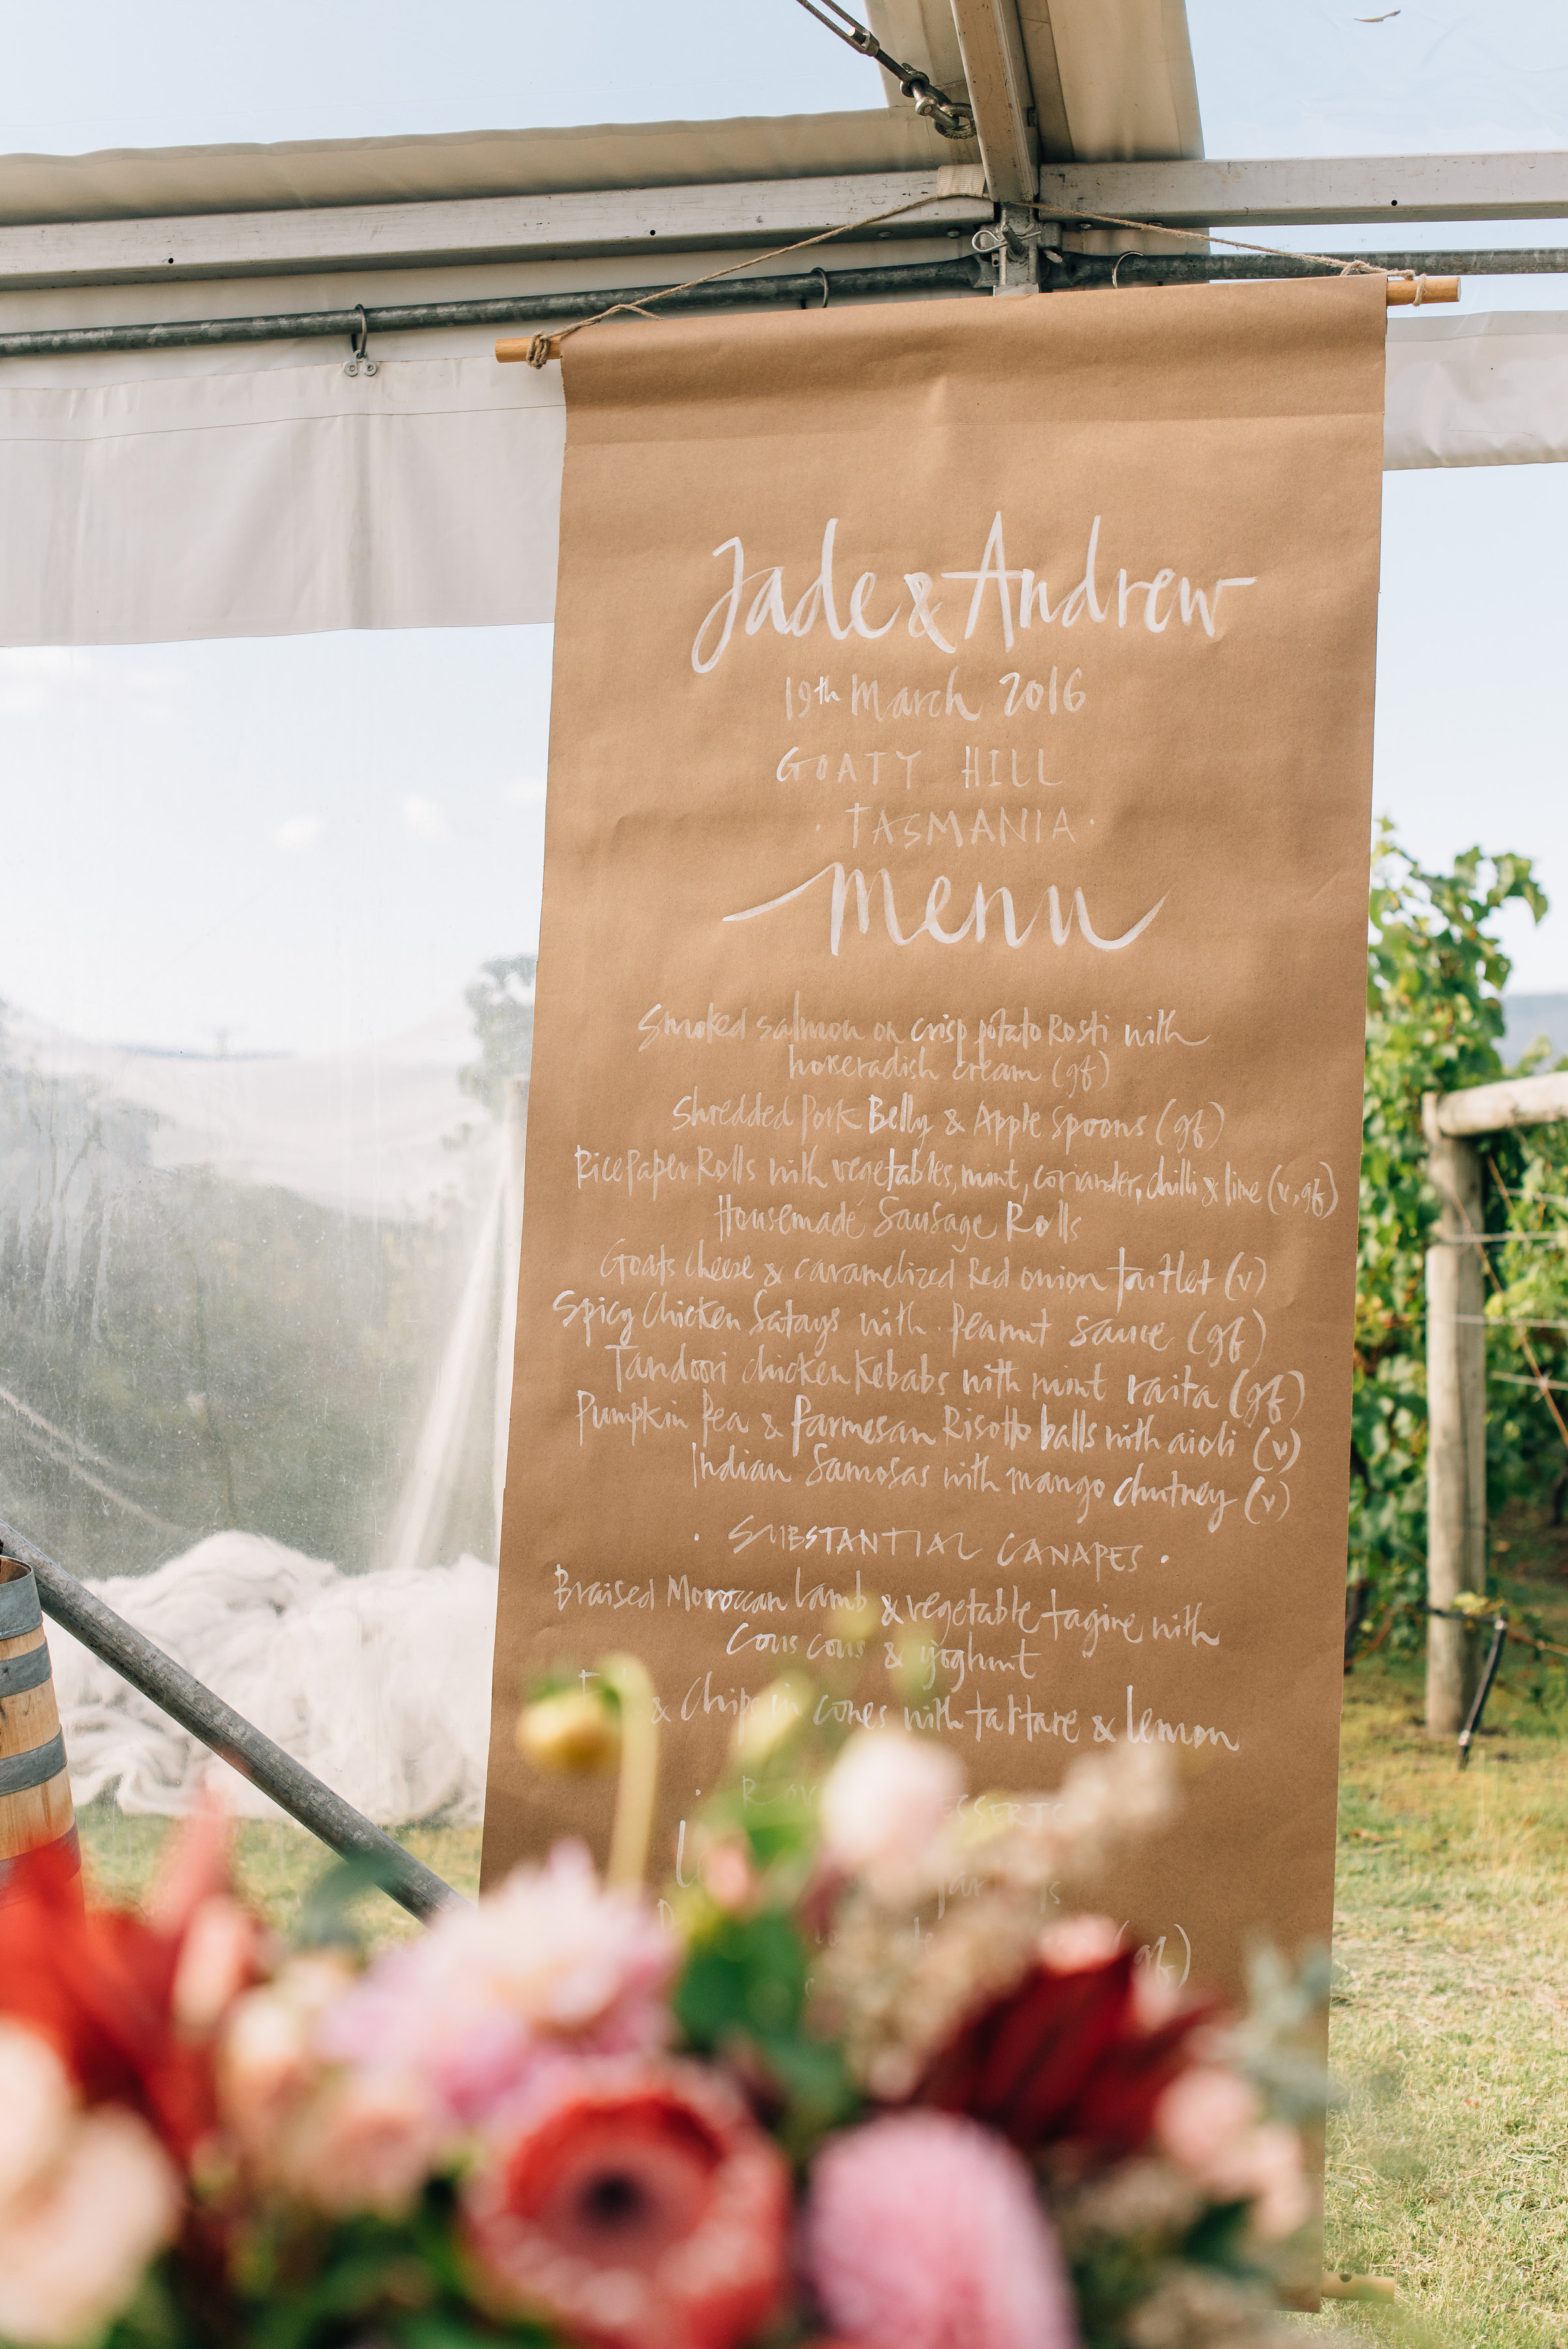  Hand written menu for the wedding reception at Goaty Hill 